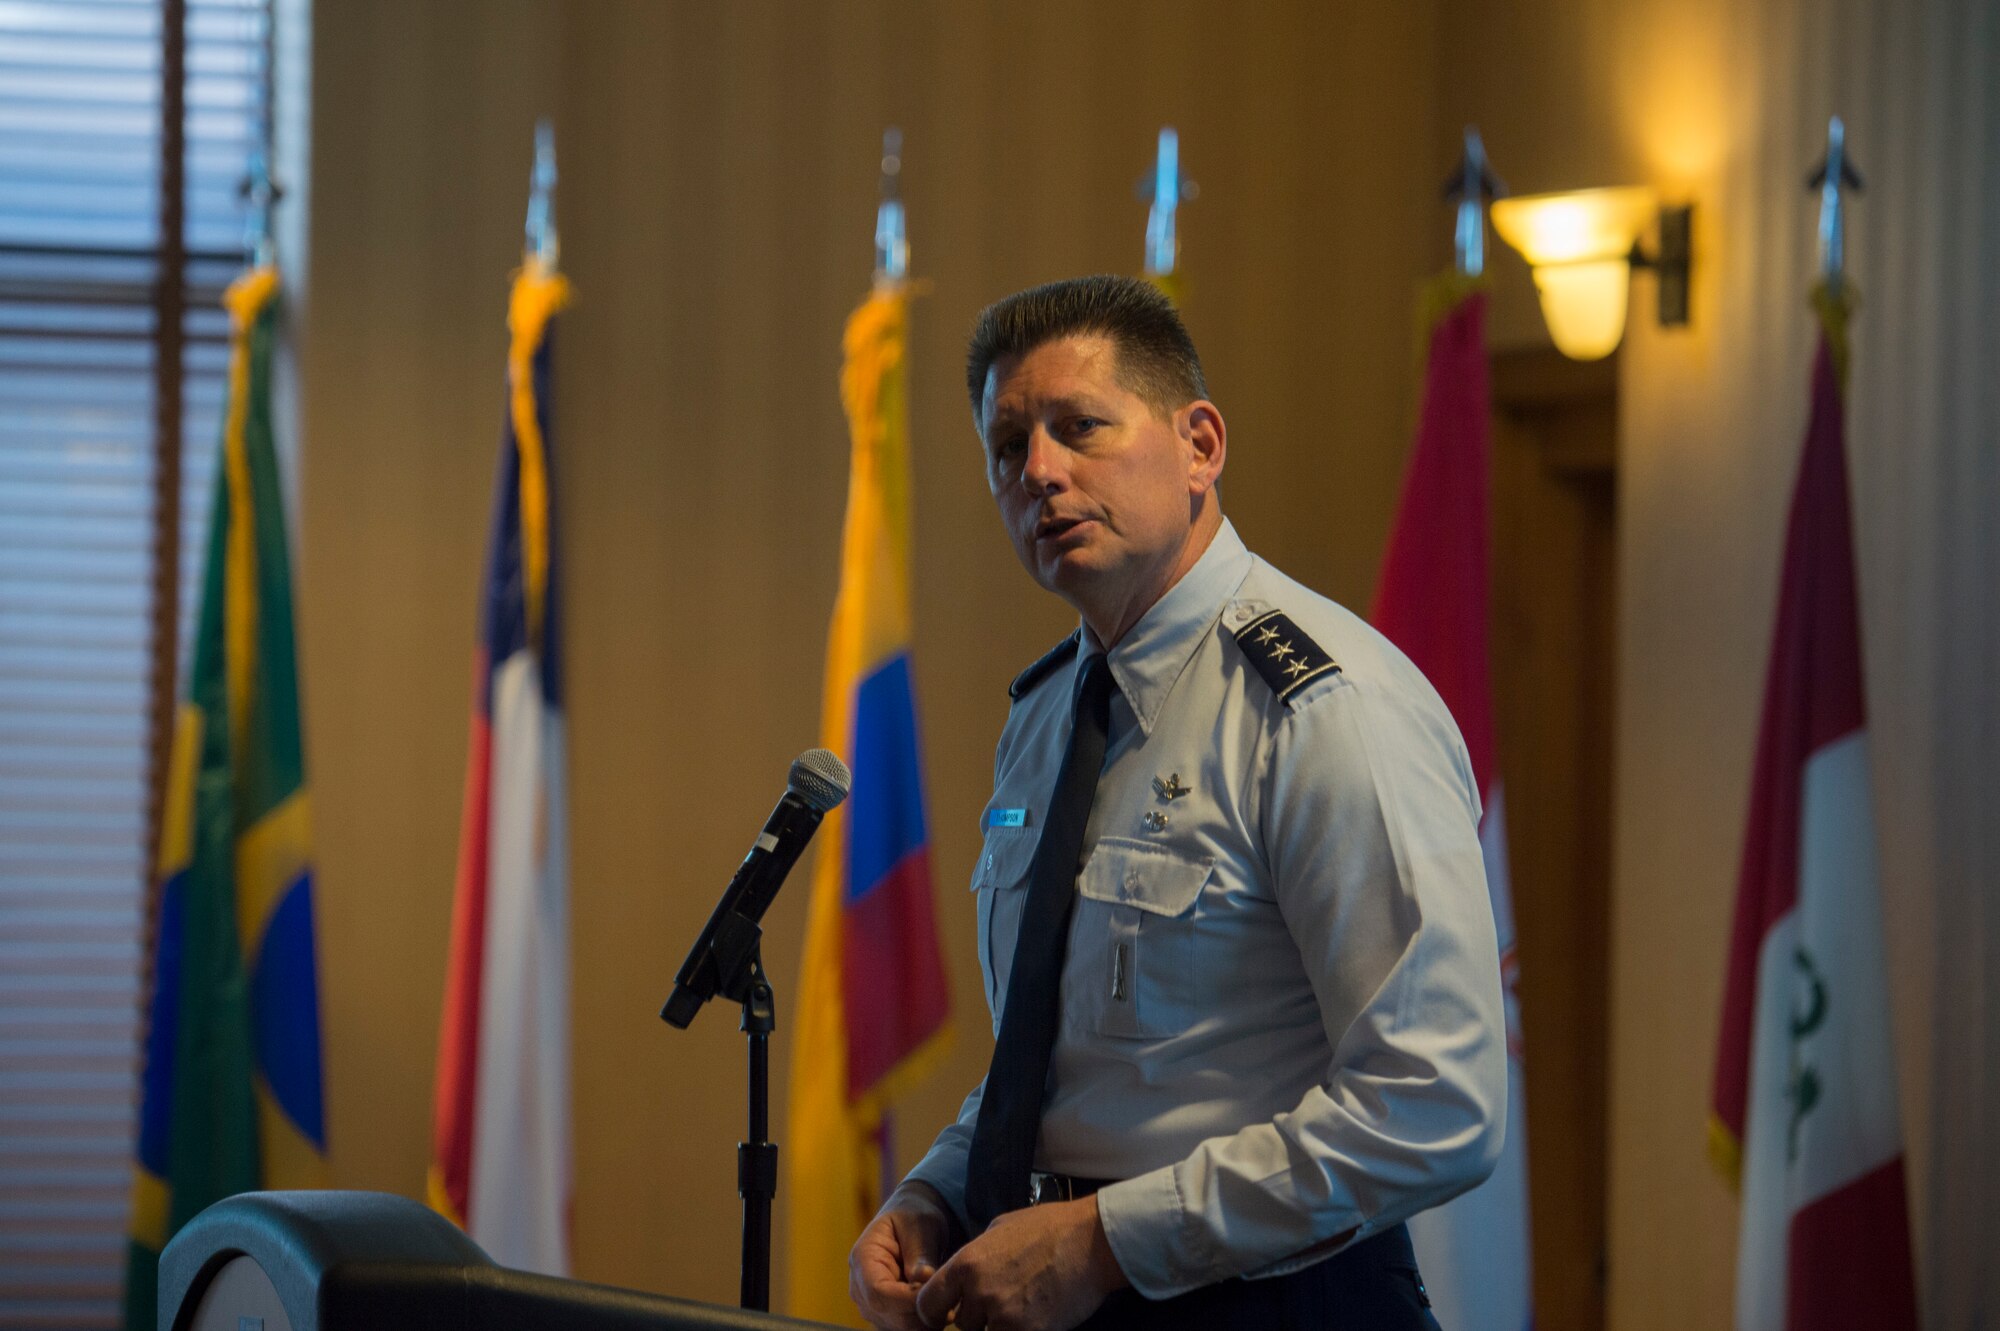 South American Air Chiefs and Senior Enlisted Leaders Conference